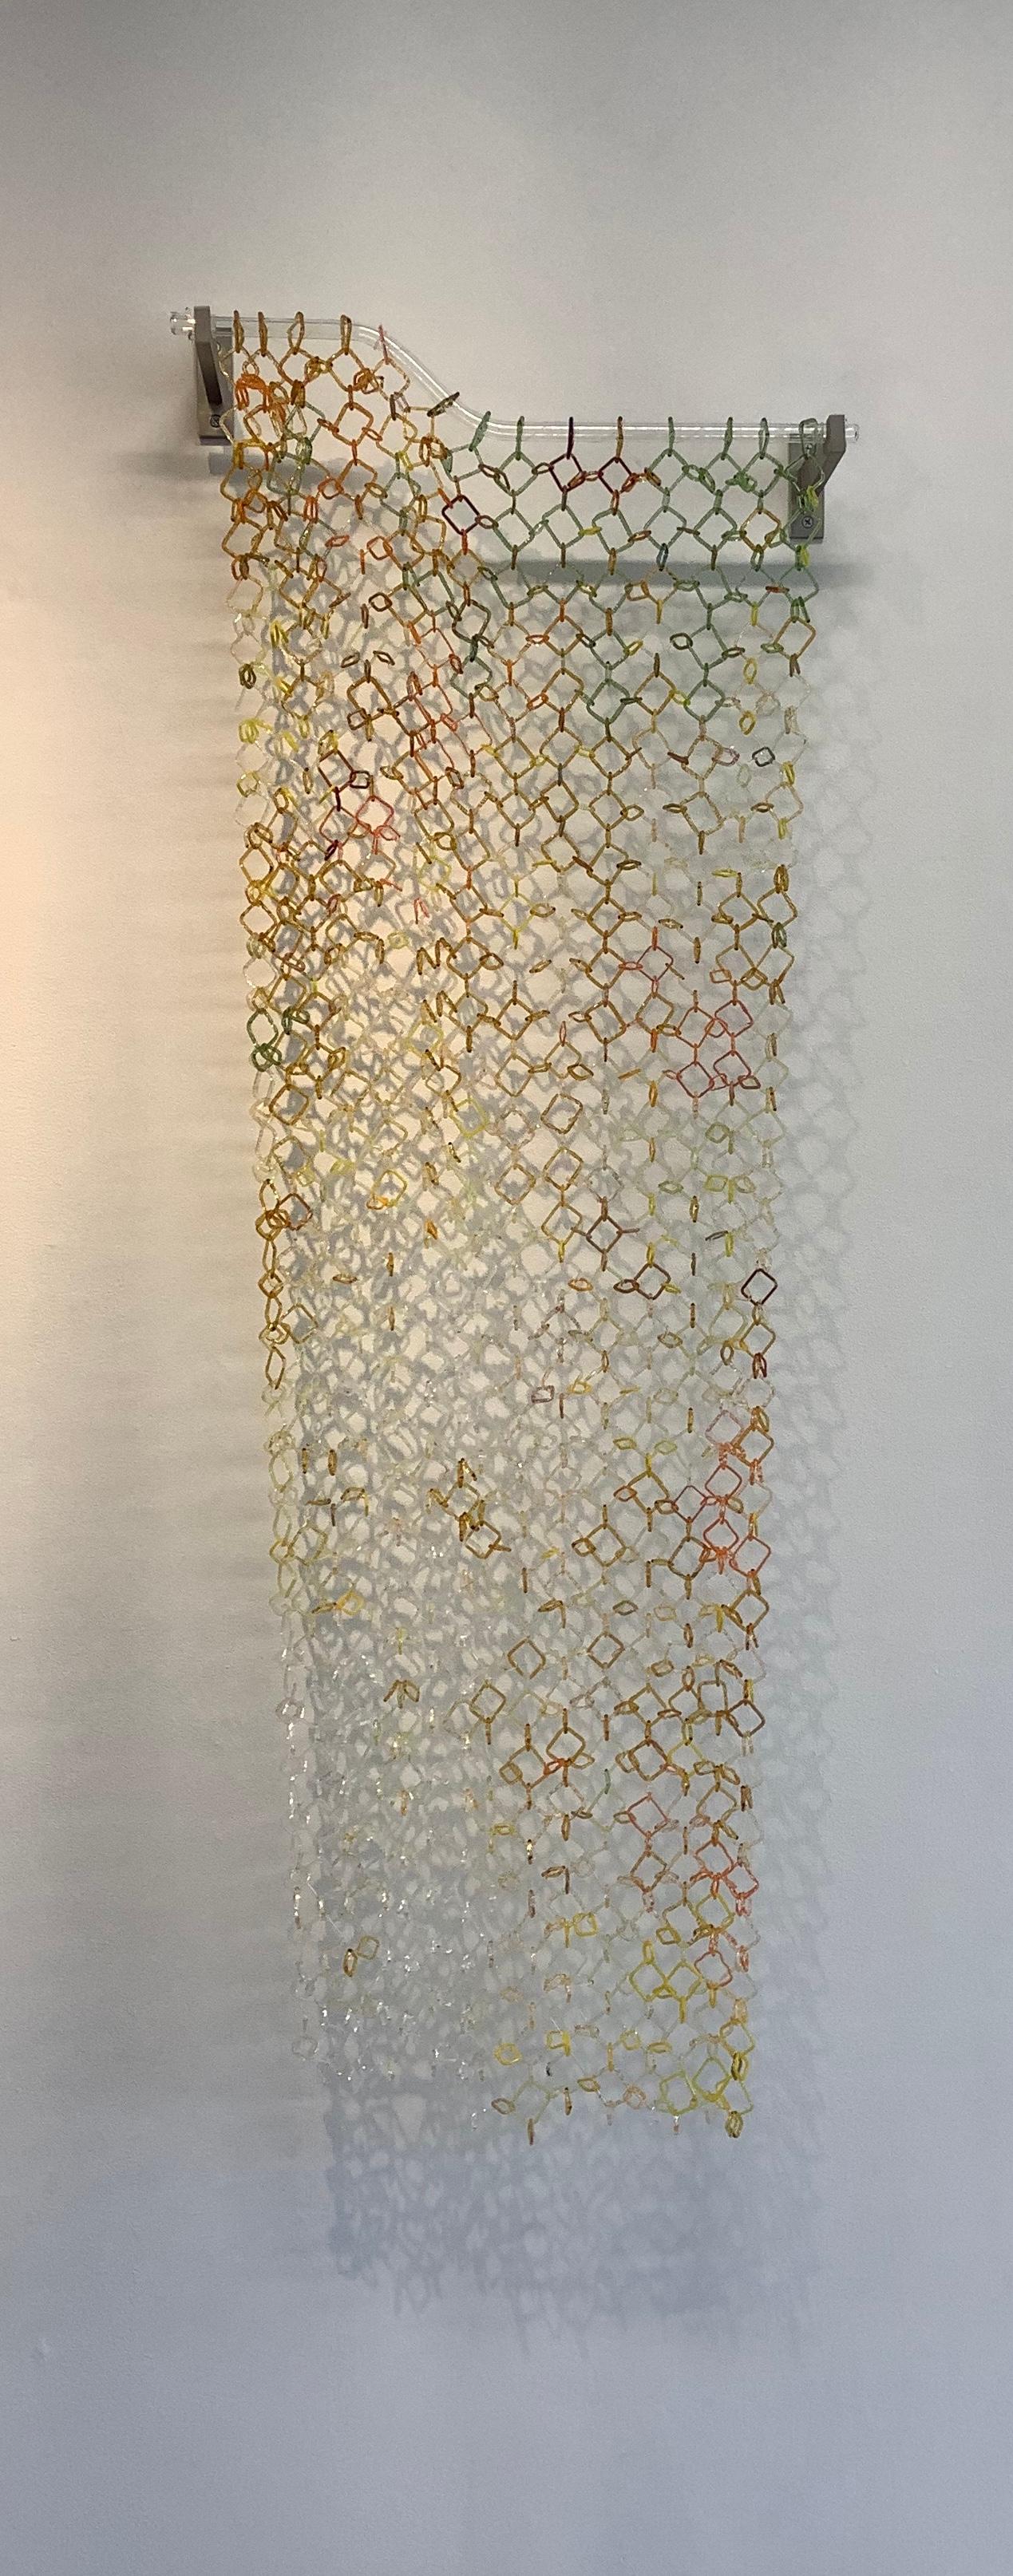 David Licata Abstract Sculpture - Lichen Two, Long Hanging Sculpture, Torch-Worked Glass, Chain Maille Links